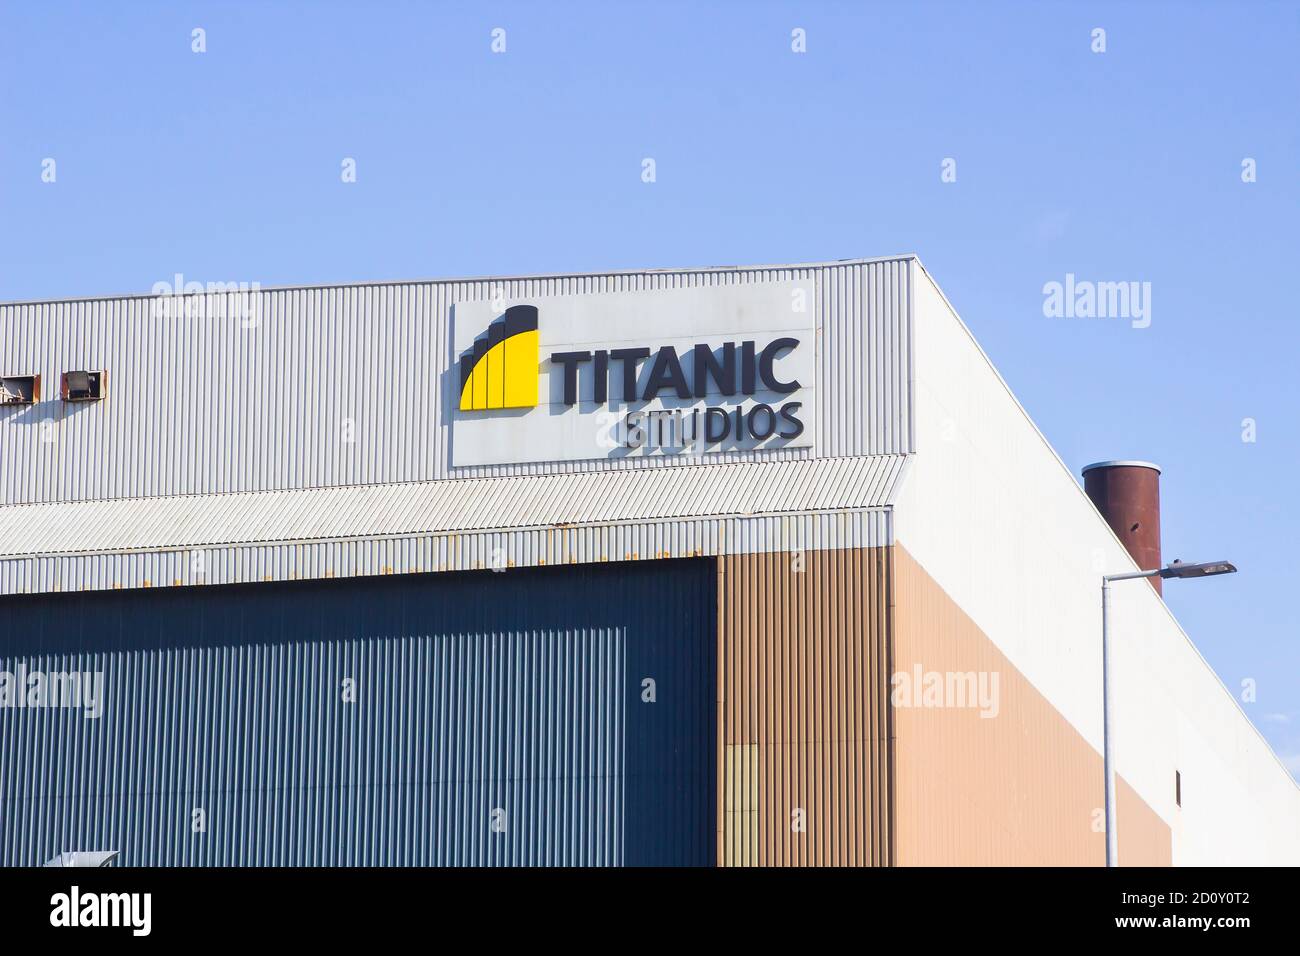 27 September 2020 The business logo sign of the now world famous Titanic Studios located on top of the 106000 square foot studio building in Belfast N Stock Photo